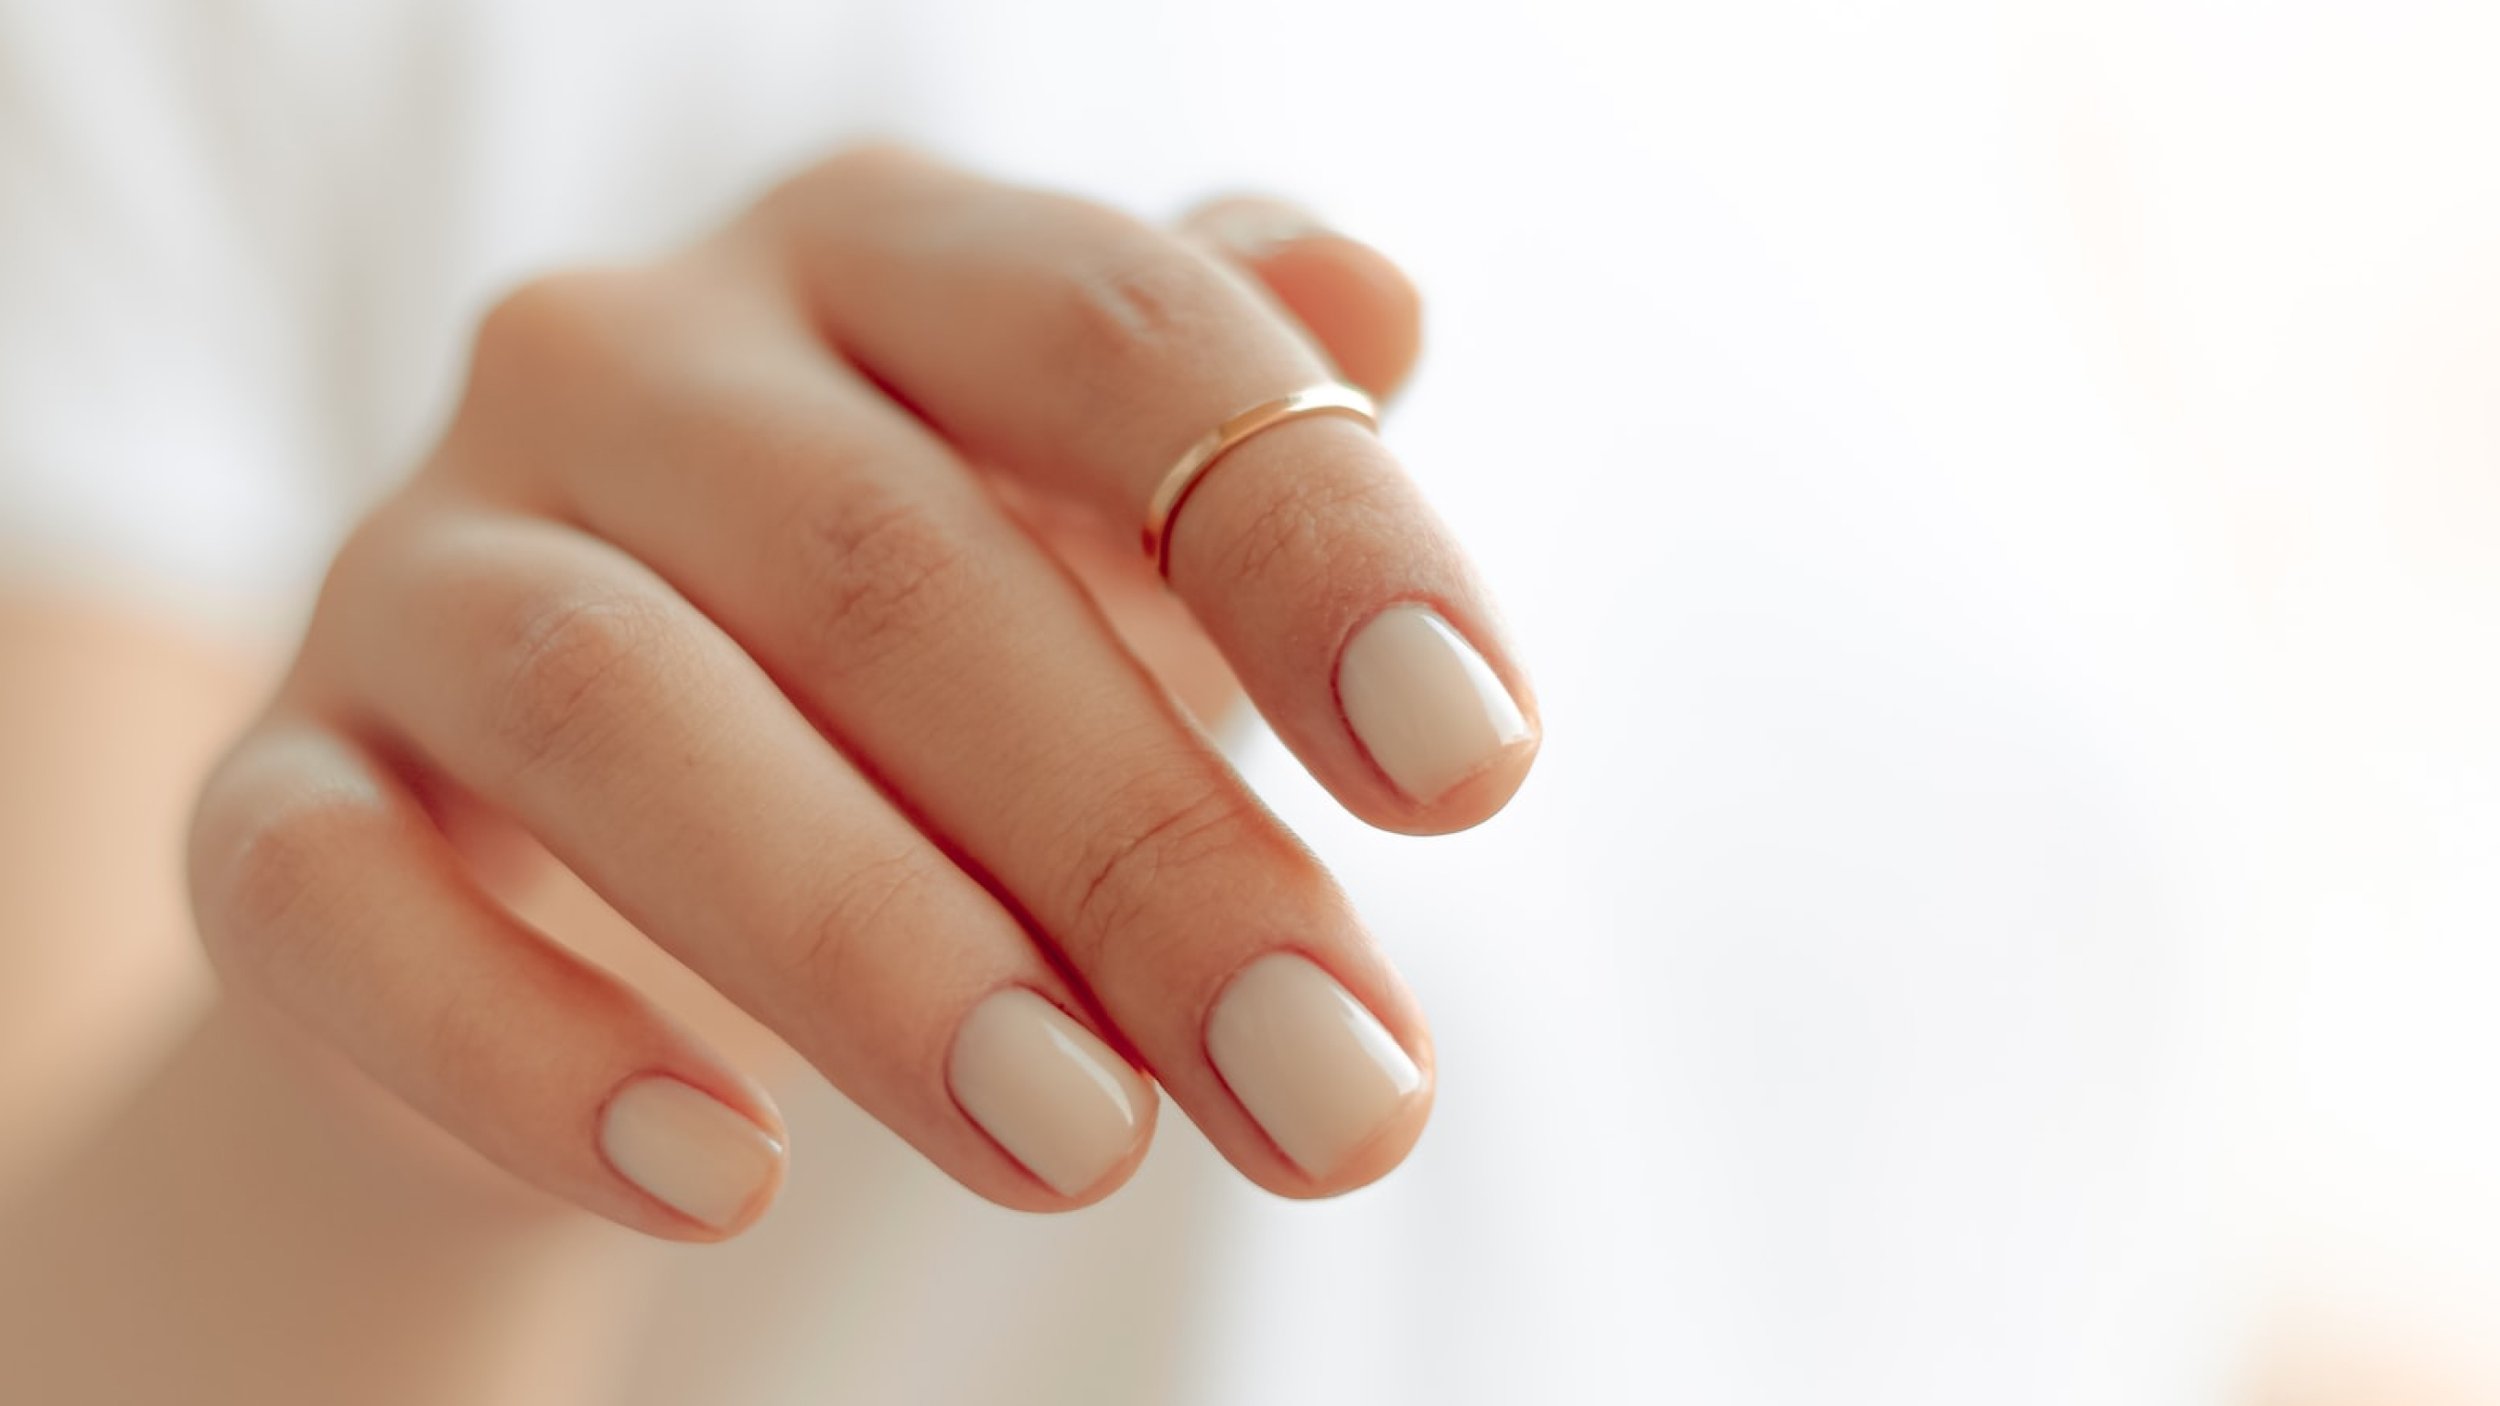 18 Chic Wedding Nail Art Ideas Beyond Just a Classic French